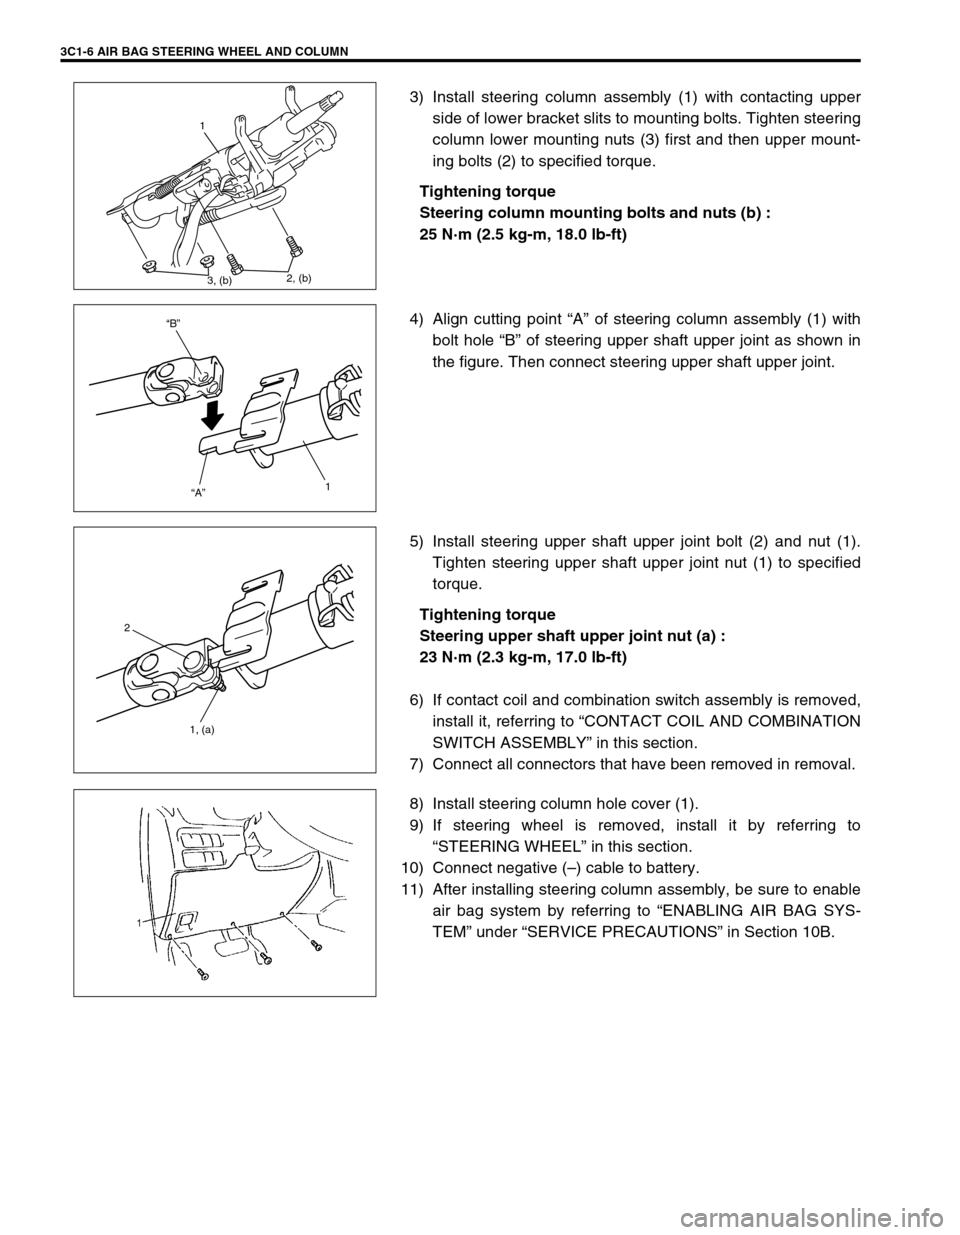 SUZUKI GRAND VITARA 2001 2.G Owners Manual 3C1-6 AIR BAG STEERING WHEEL AND COLUMN
3) Install steering column assembly (1) with contacting upper
side of lower bracket slits to mounting bolts. Tighten steering
column lower mounting nuts (3) fir